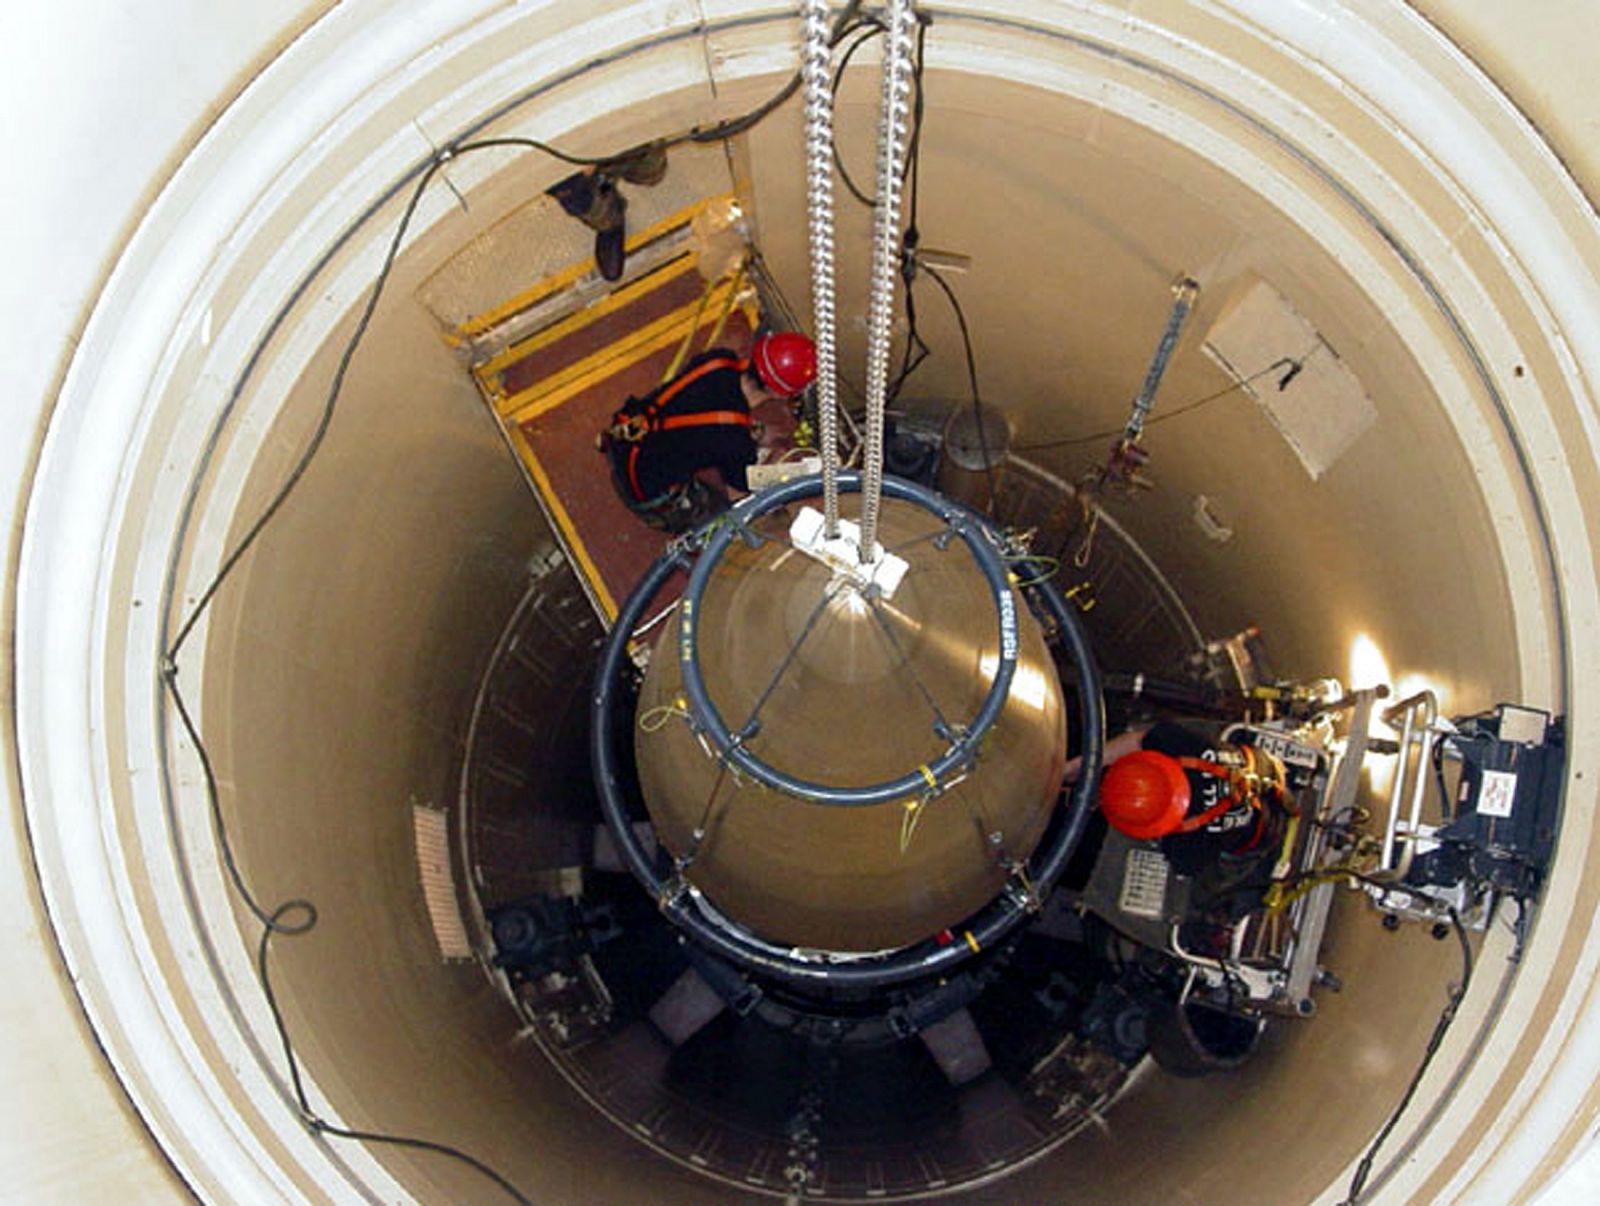 File photo of a US Air Force missile maintenance team removing the upper section of an intercontinental ballistic missile with a nuclear warhead